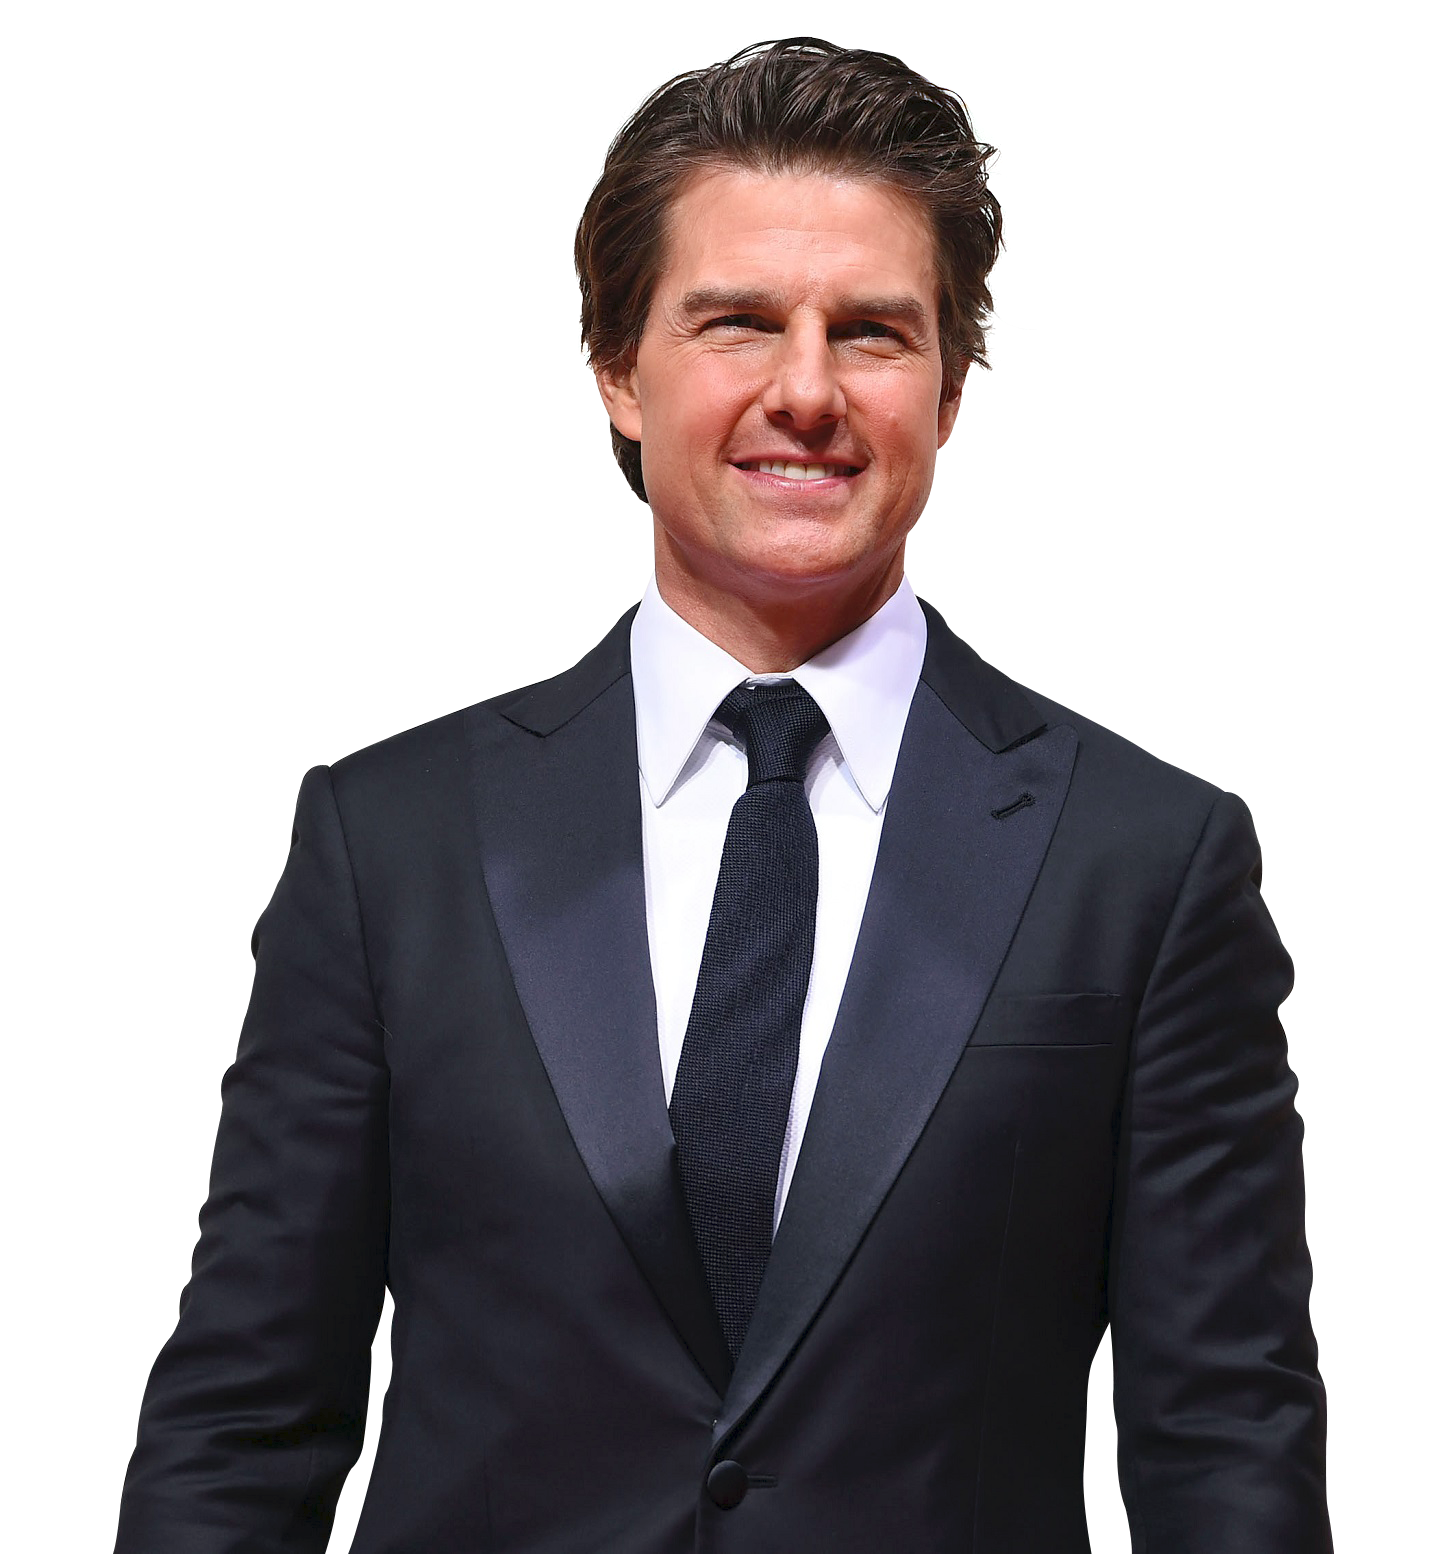 Tom Cruise PNG Clipart